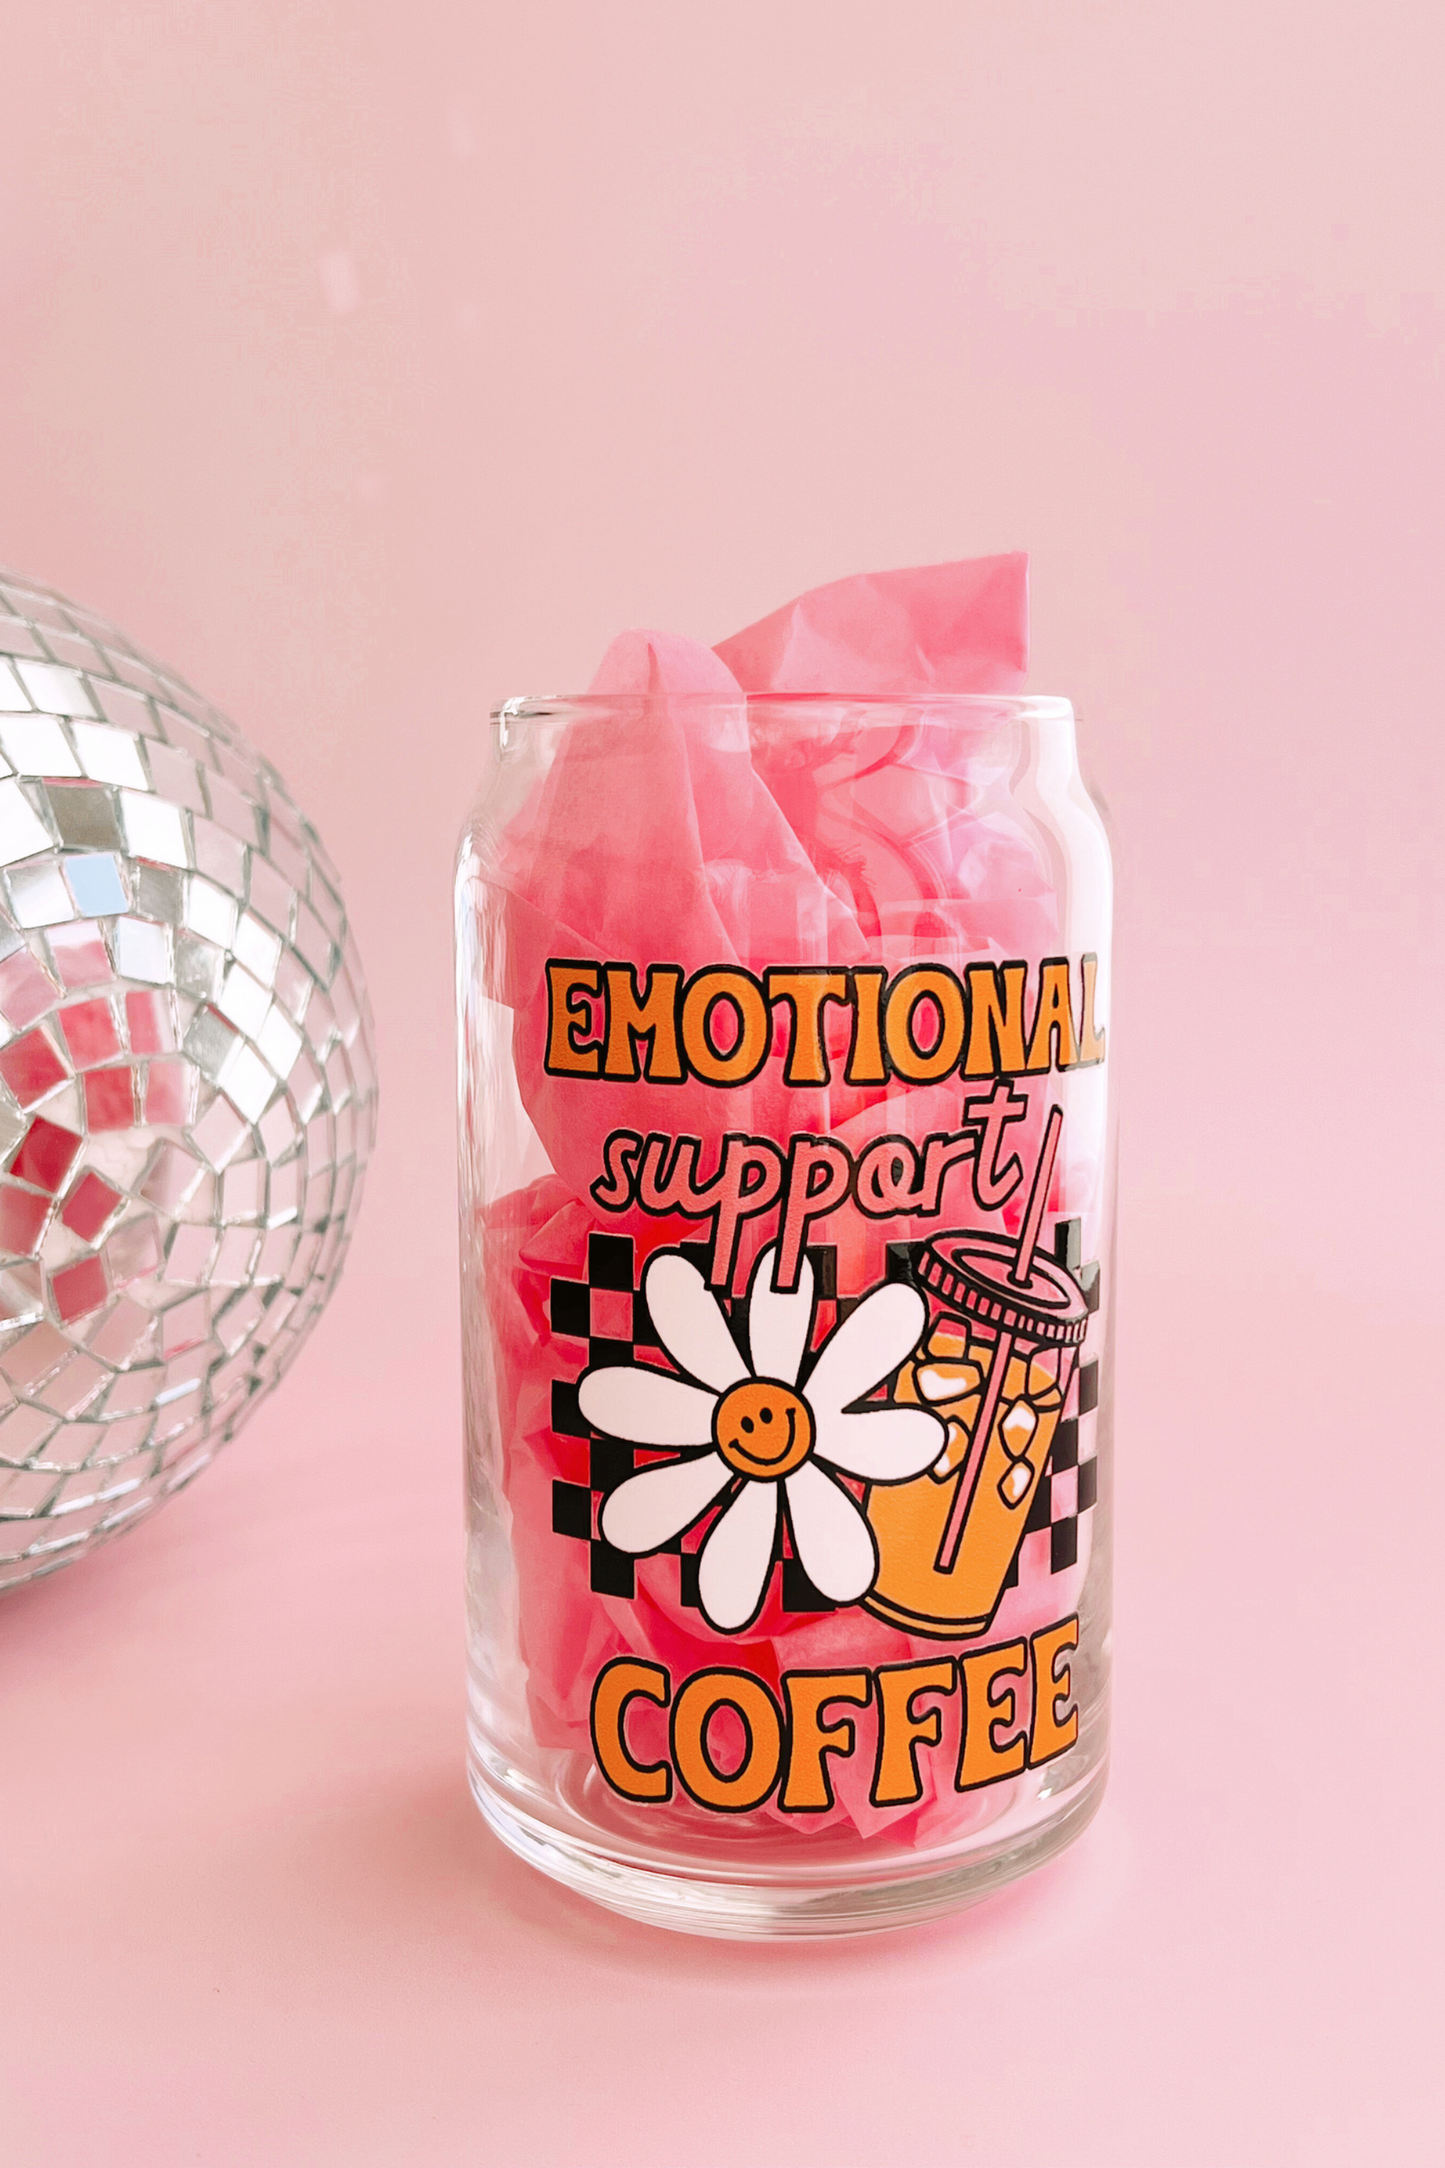 Emotional Support Iced Coffee Glass Cup